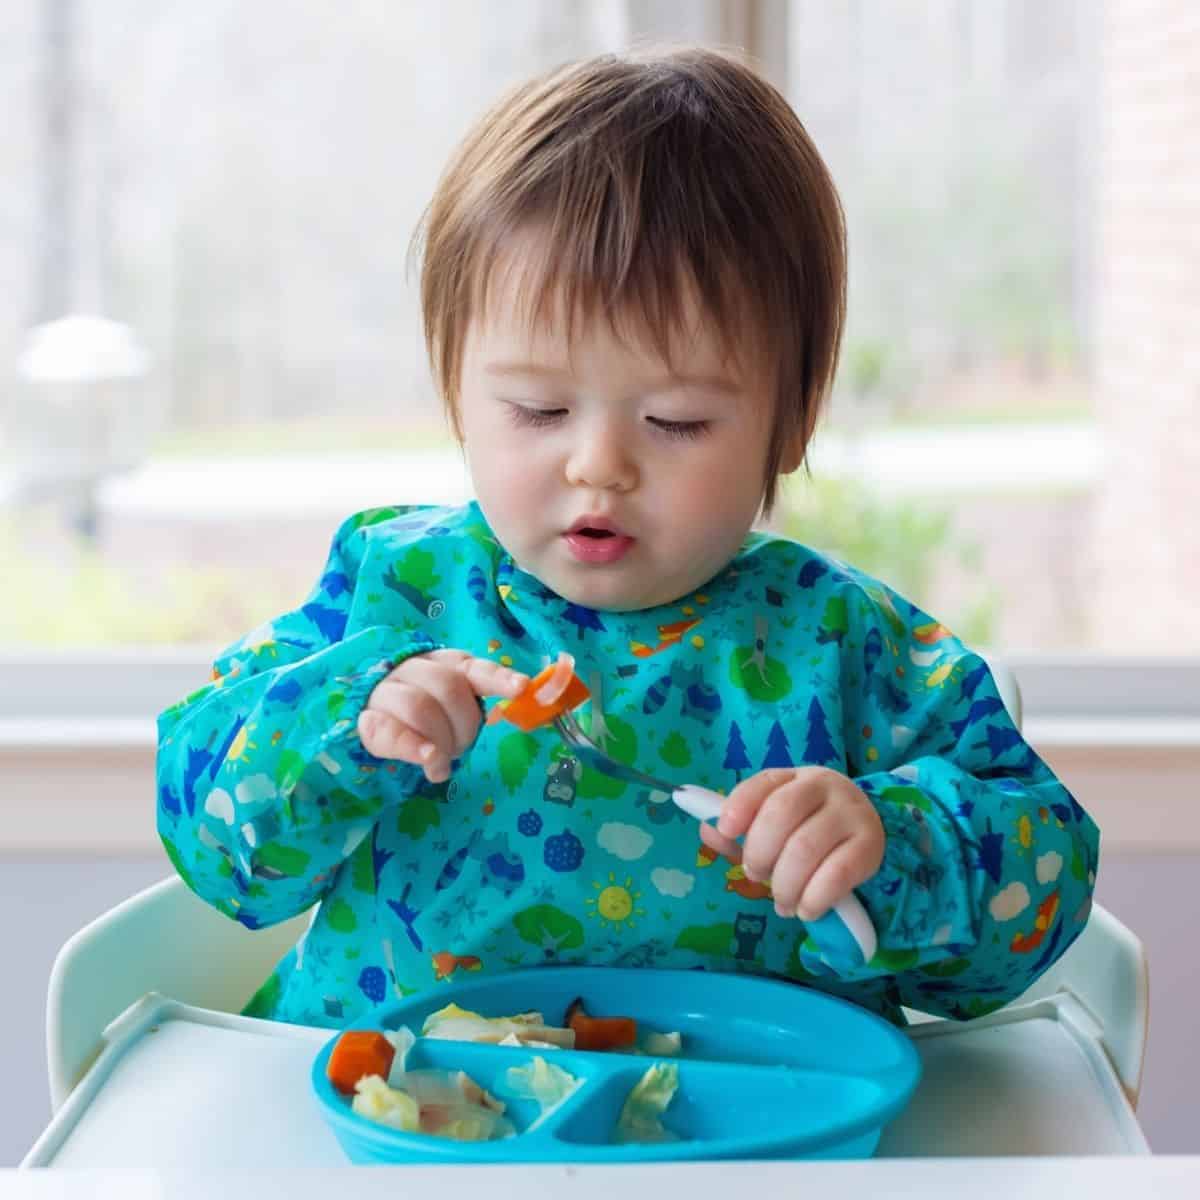 Want your baby or toddler to feed themselves? Follow these easy tips and get the best utensils to use to encourage your baby or toddler to self-feed! 